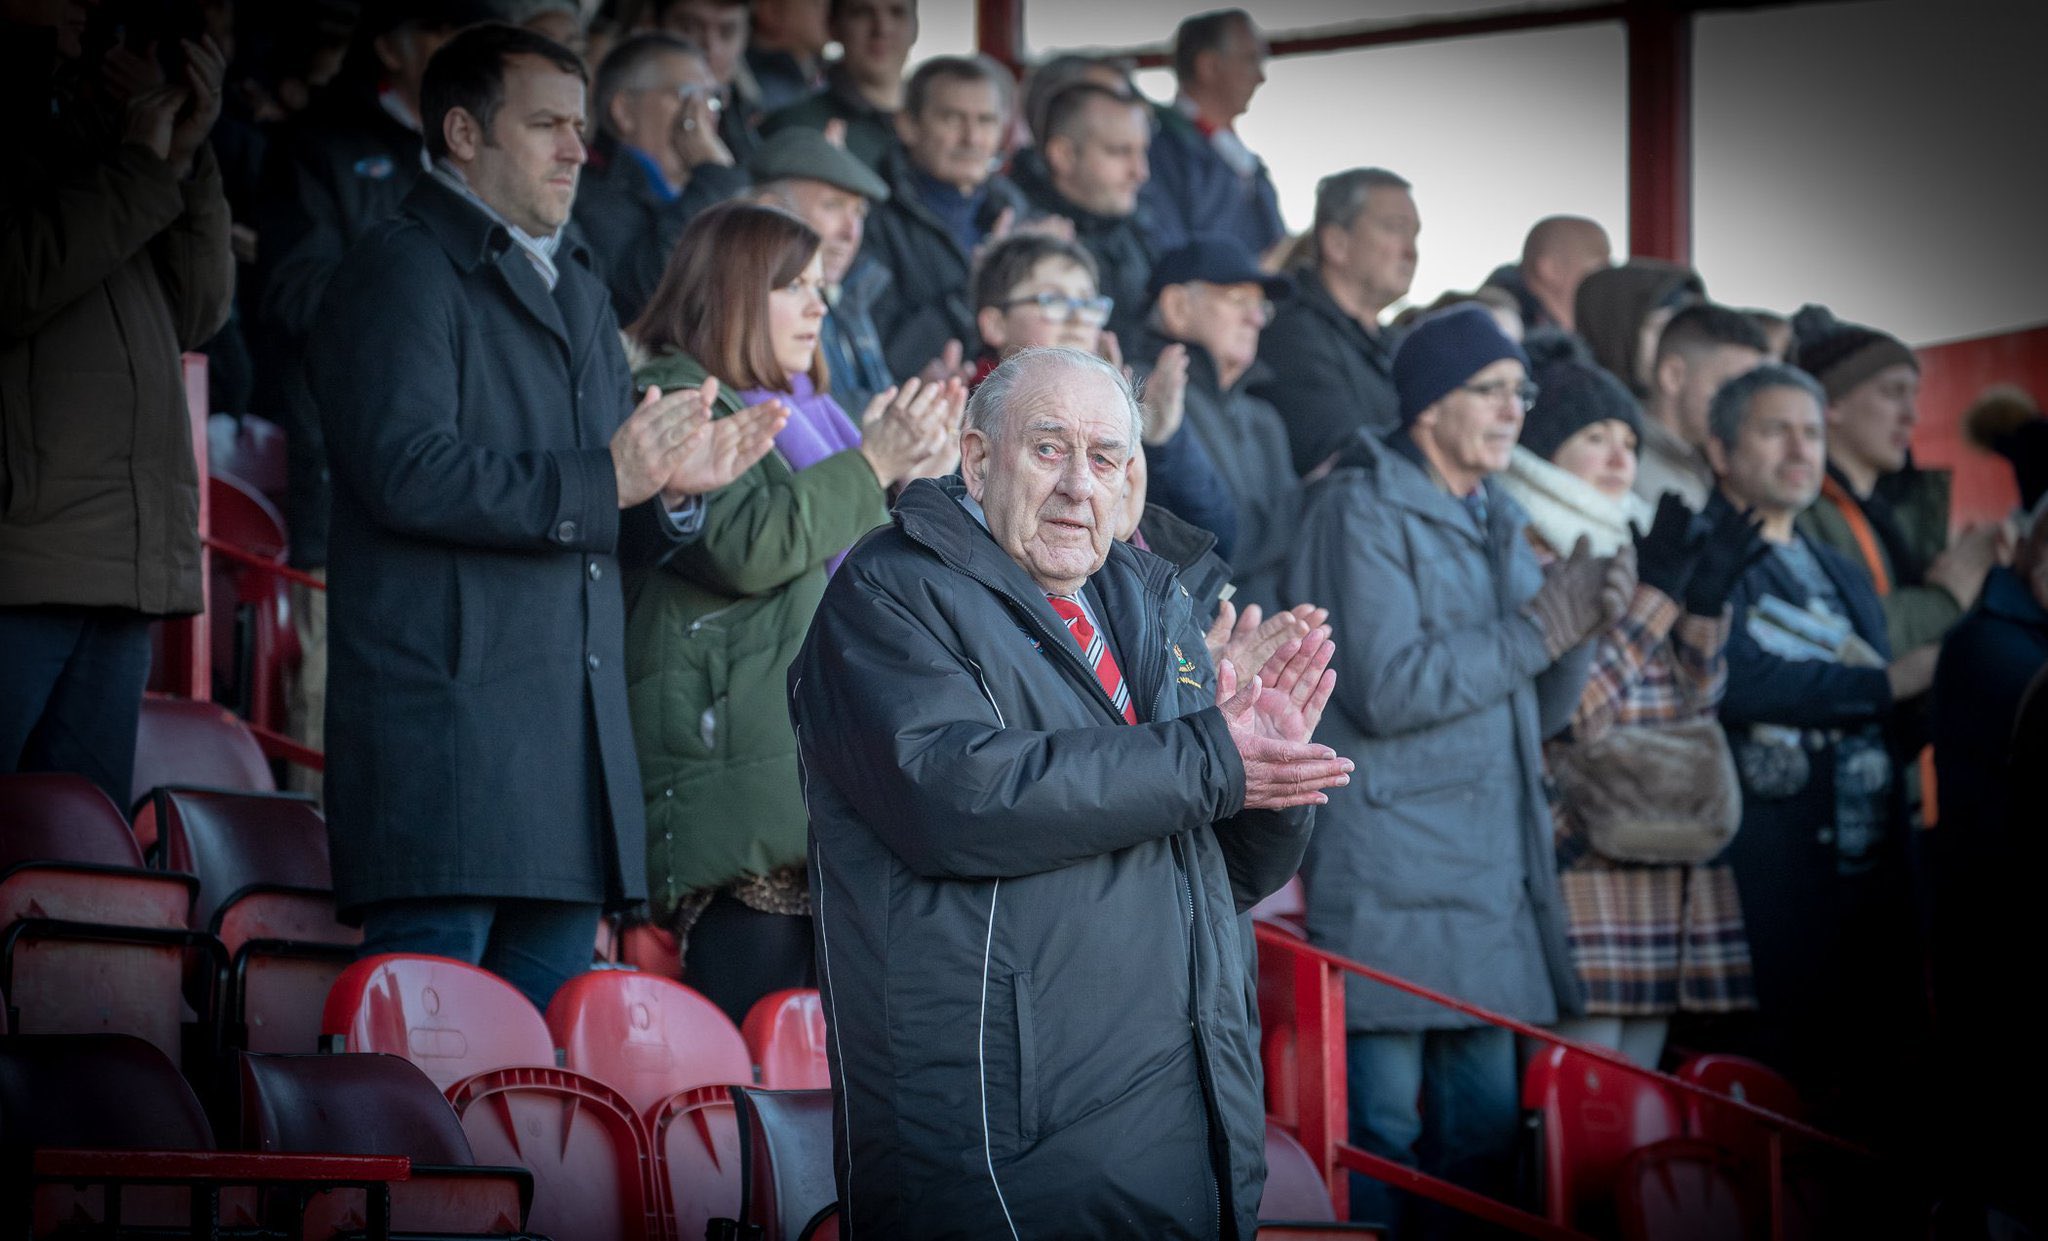 Altrincham FC - It is with great sadness that we have